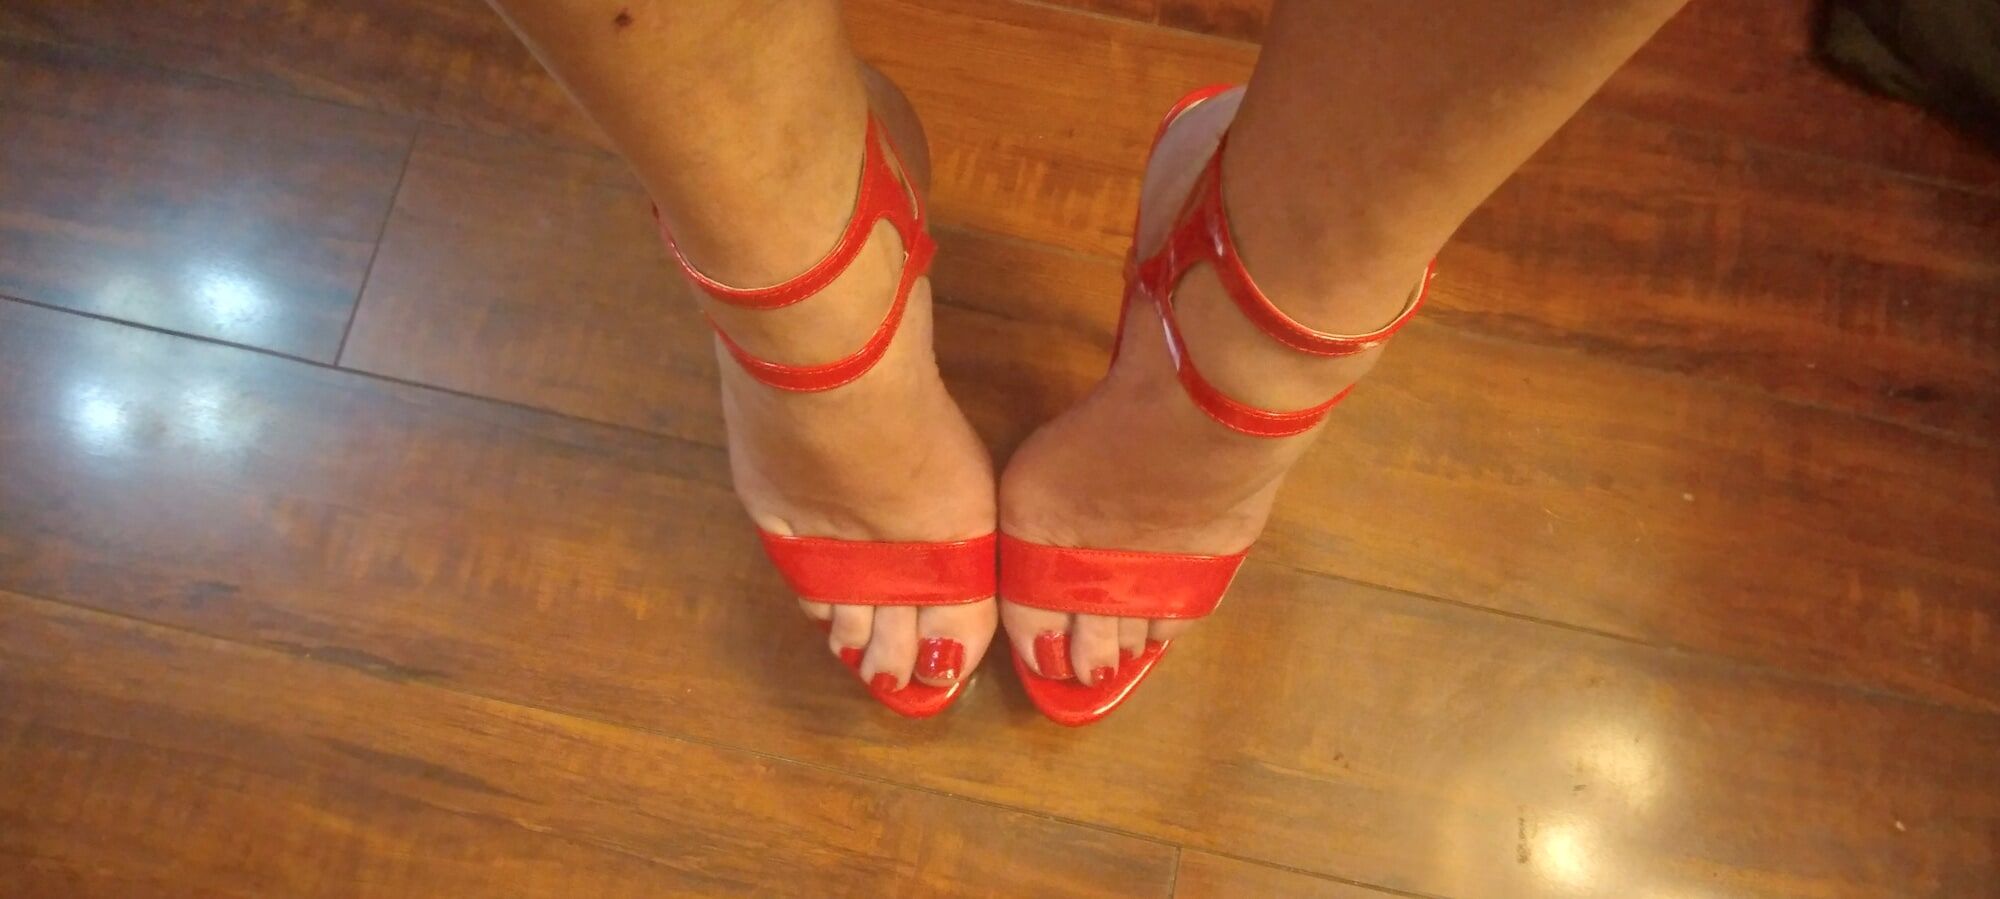 Pics of my feet and they're lookin so sweet. #3